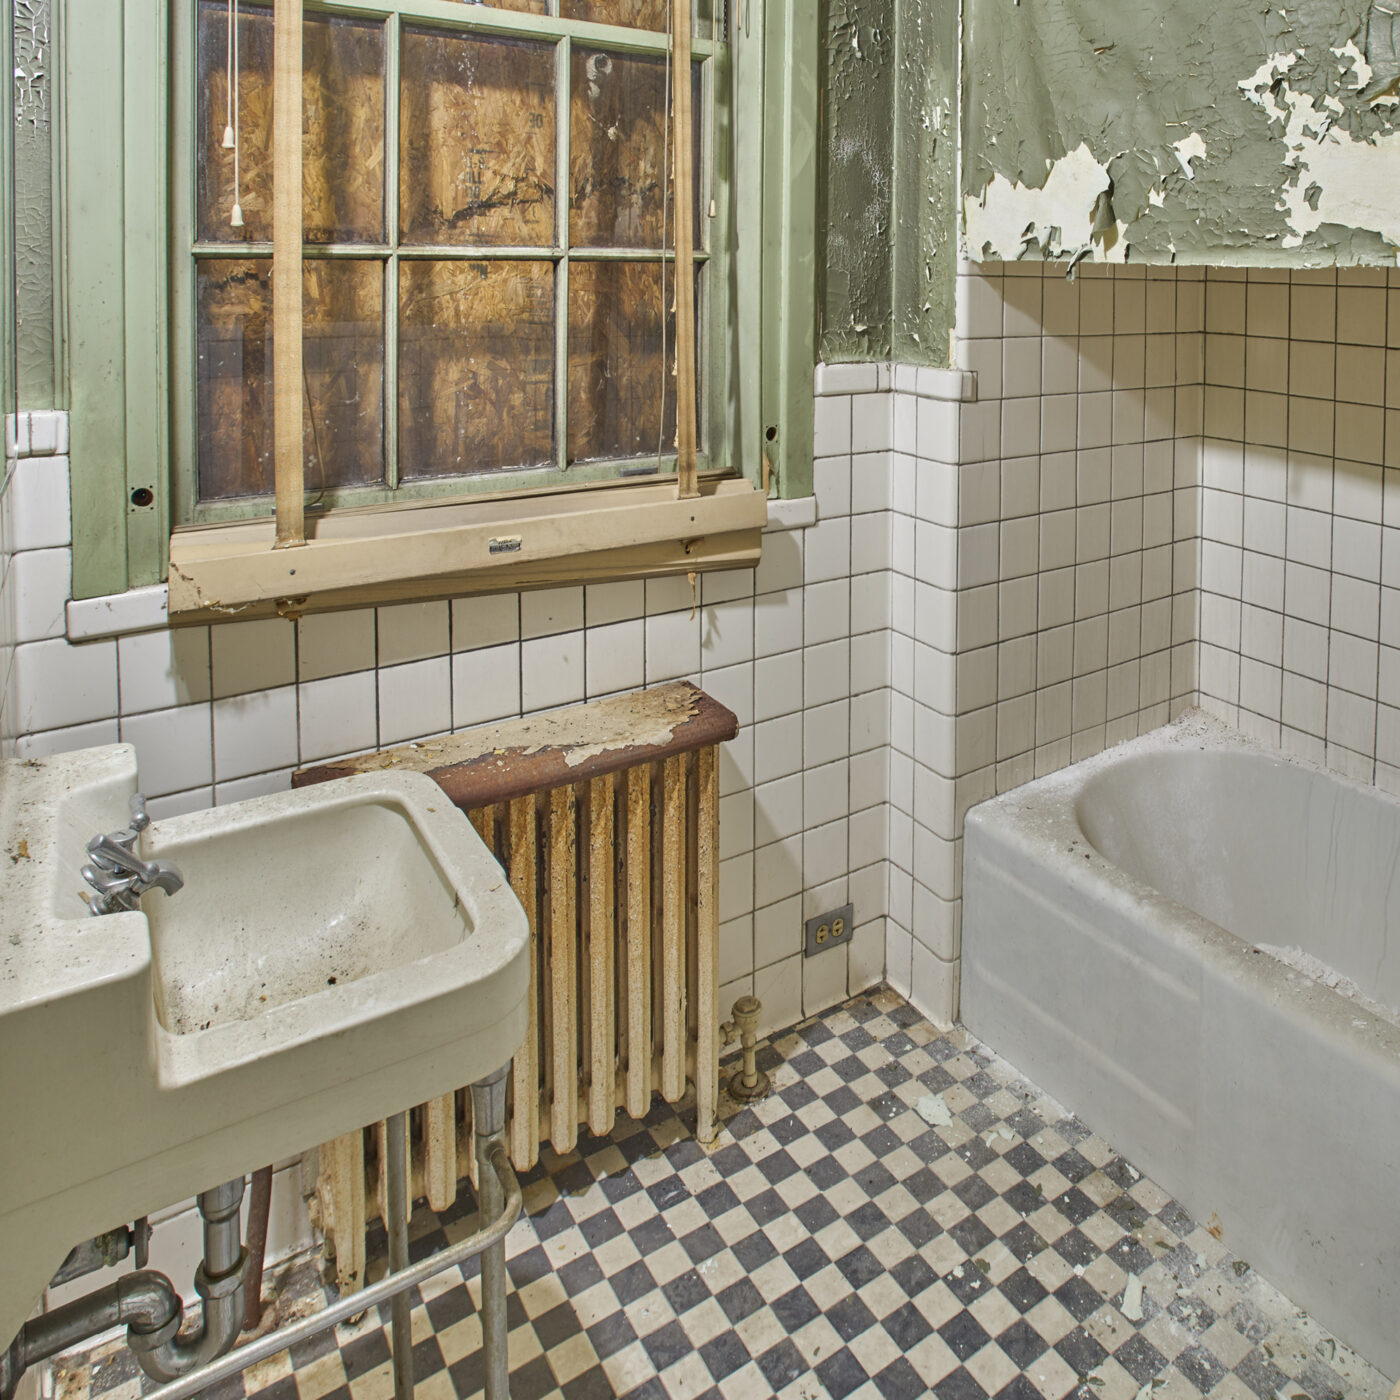 A photo of a bathroom sink and bathtub in pre-restoration condition. The window is boarded, the floor is tiled with black and white checkered tile, and the wallpaper is pale green.